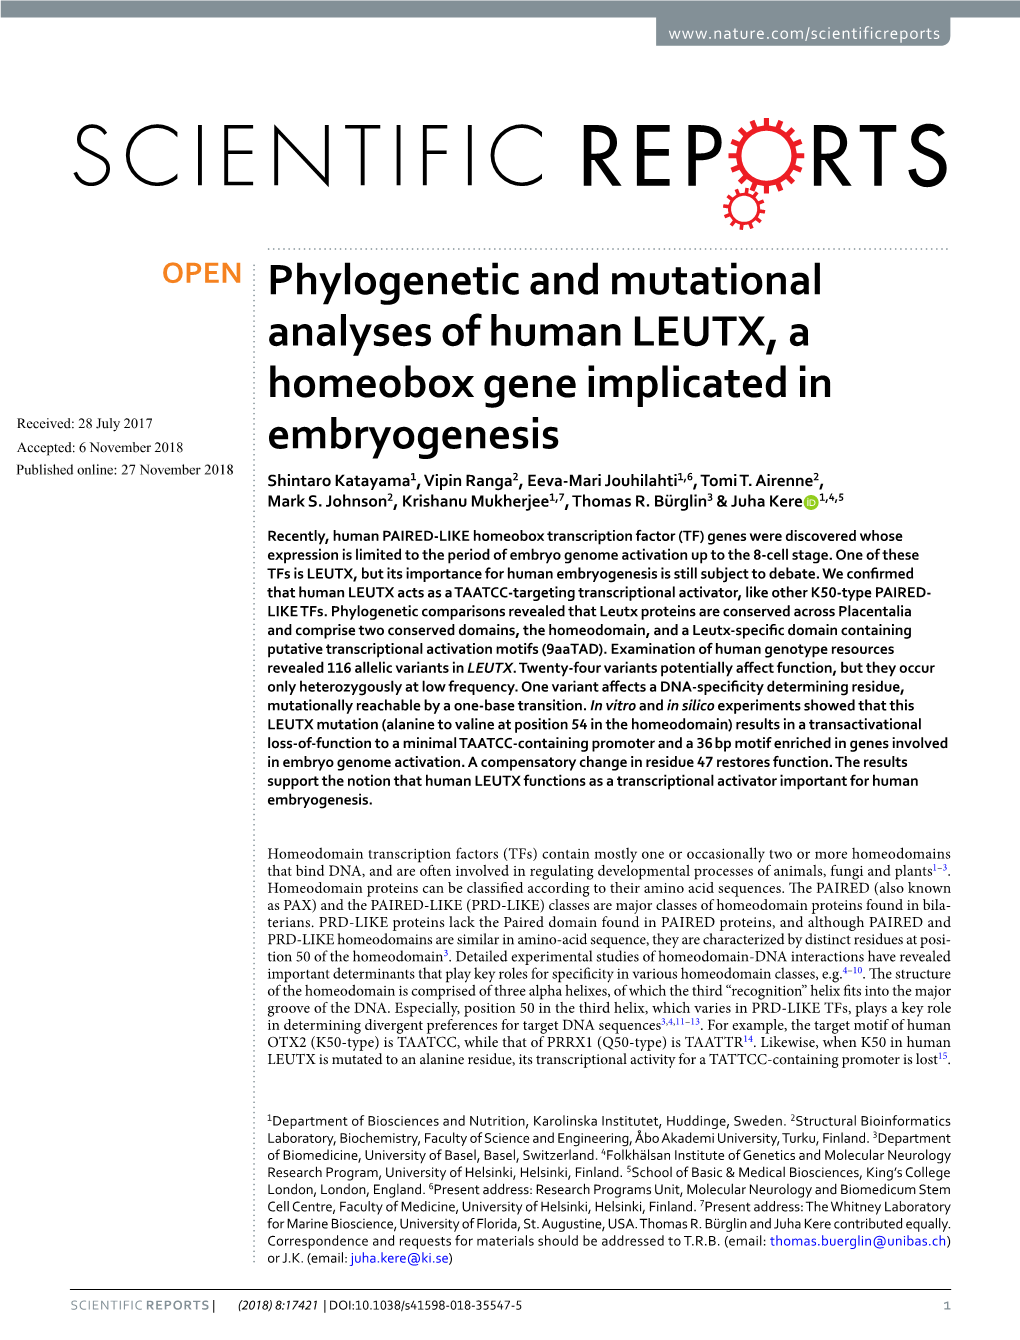 Phylogenetic and Mutational Analyses of Human LEUTX, a Homeobox